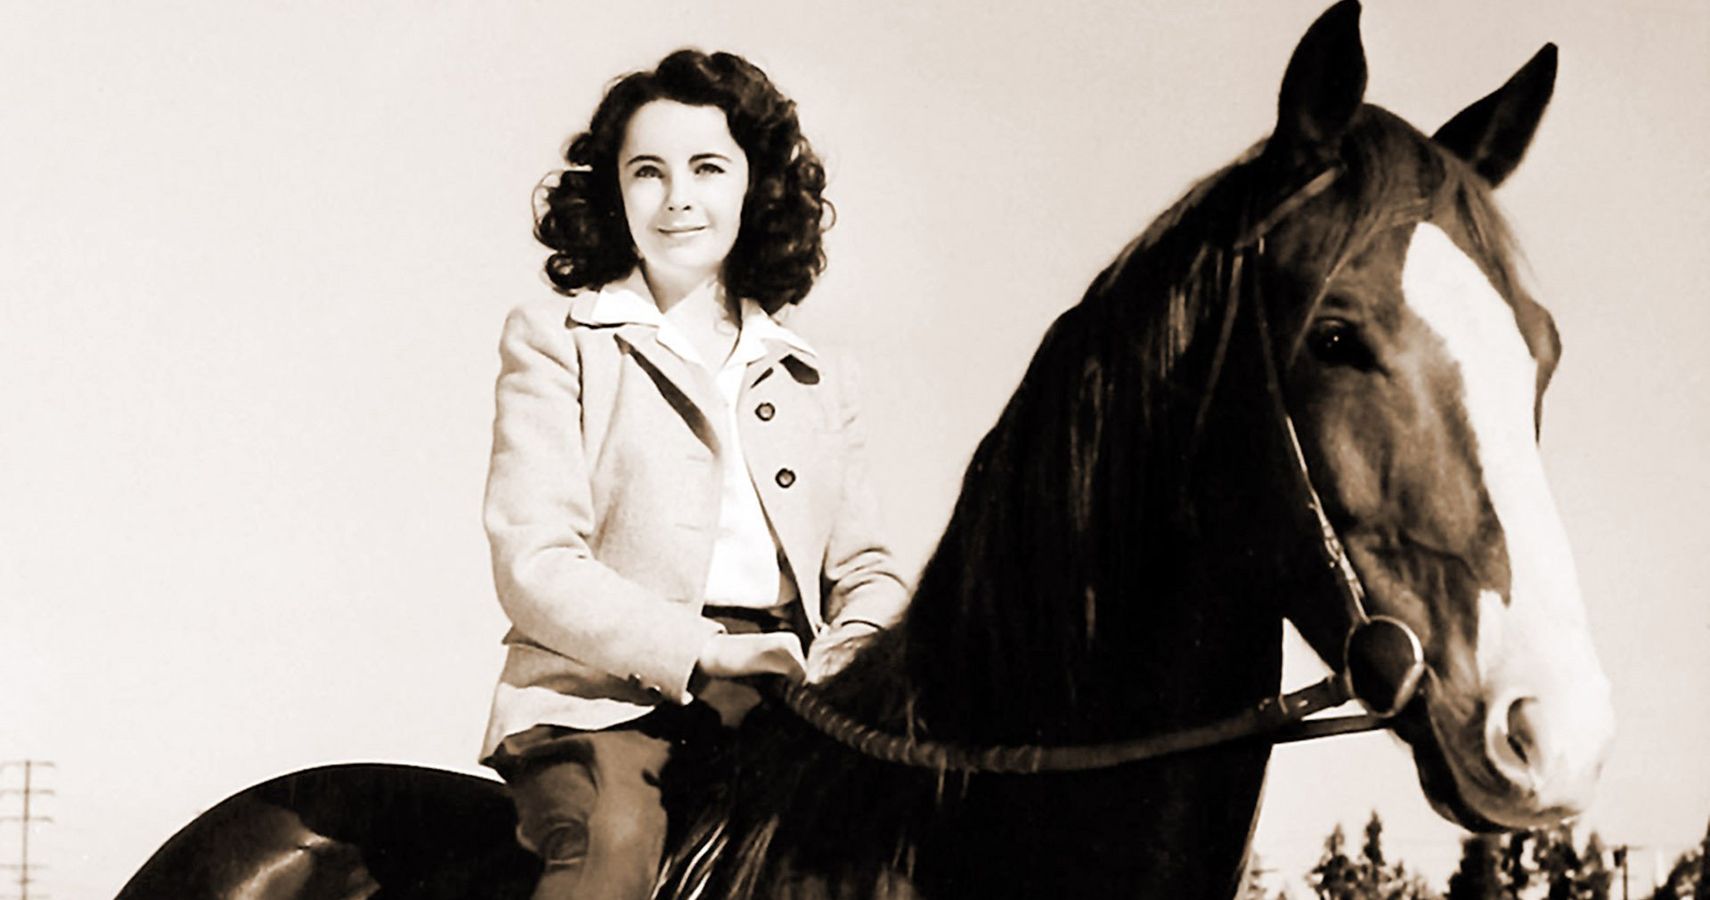 A black and white image of a woman on her horse from the movie National Velvet 